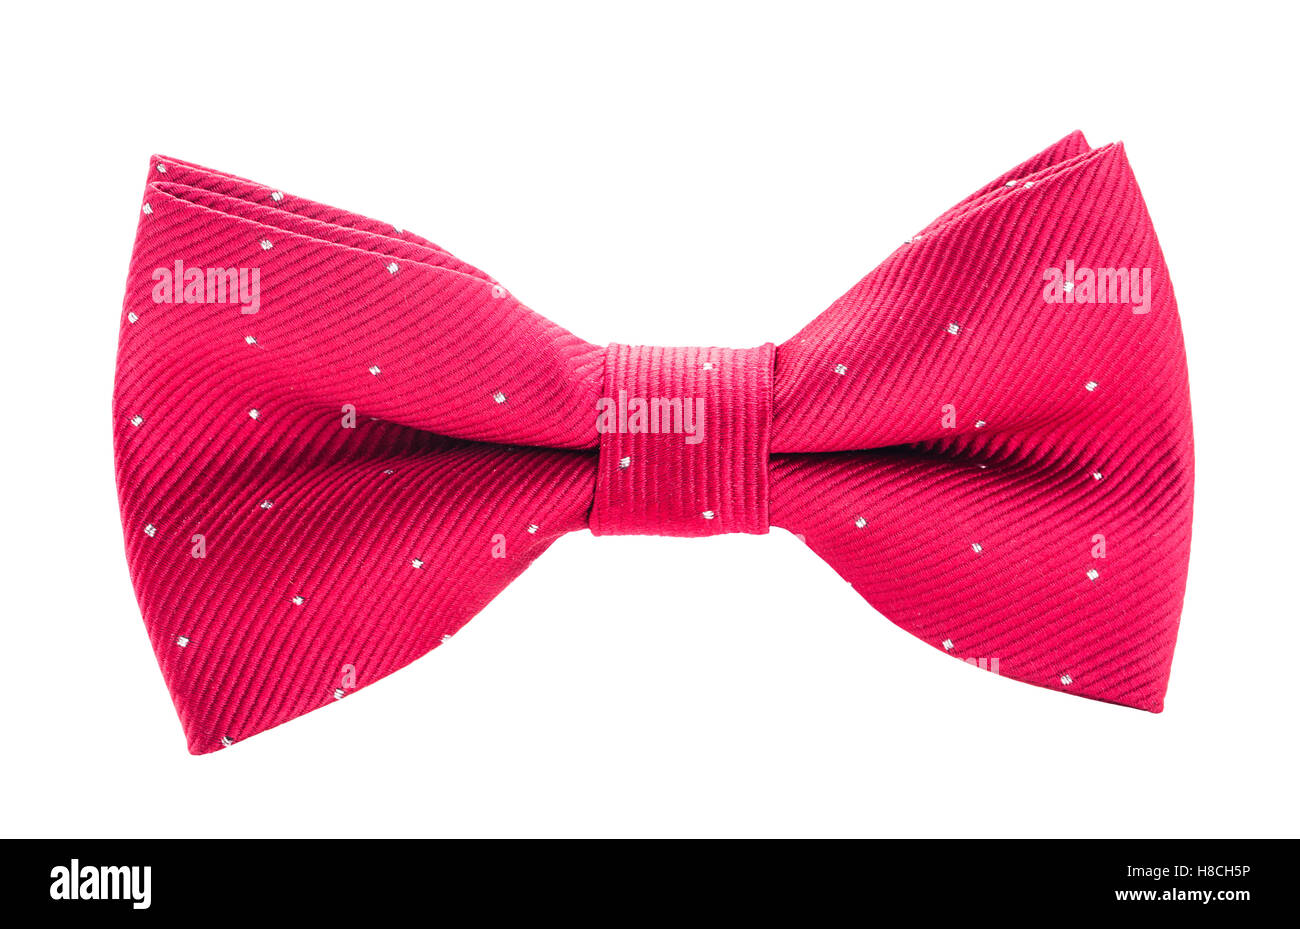 red with white polka dots bow tie isolated on white background Stock Photo